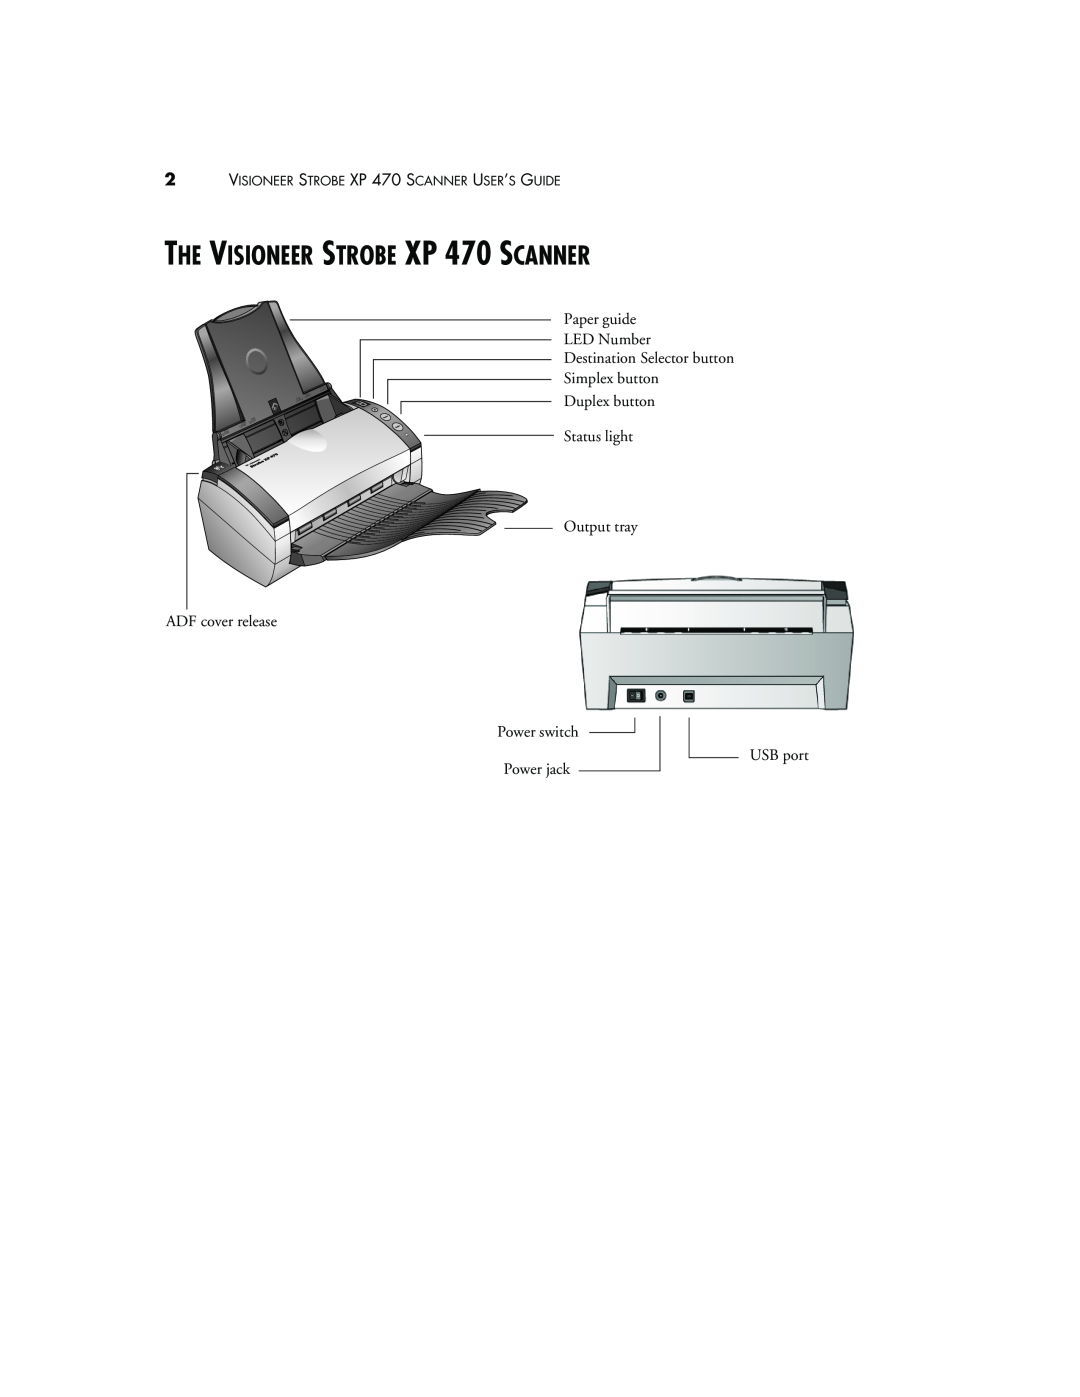 Visioneer manual THE VISIONEER STROBE XP 470 SCANNER, Paper guide LED Number Destination Selector button Simplex button 